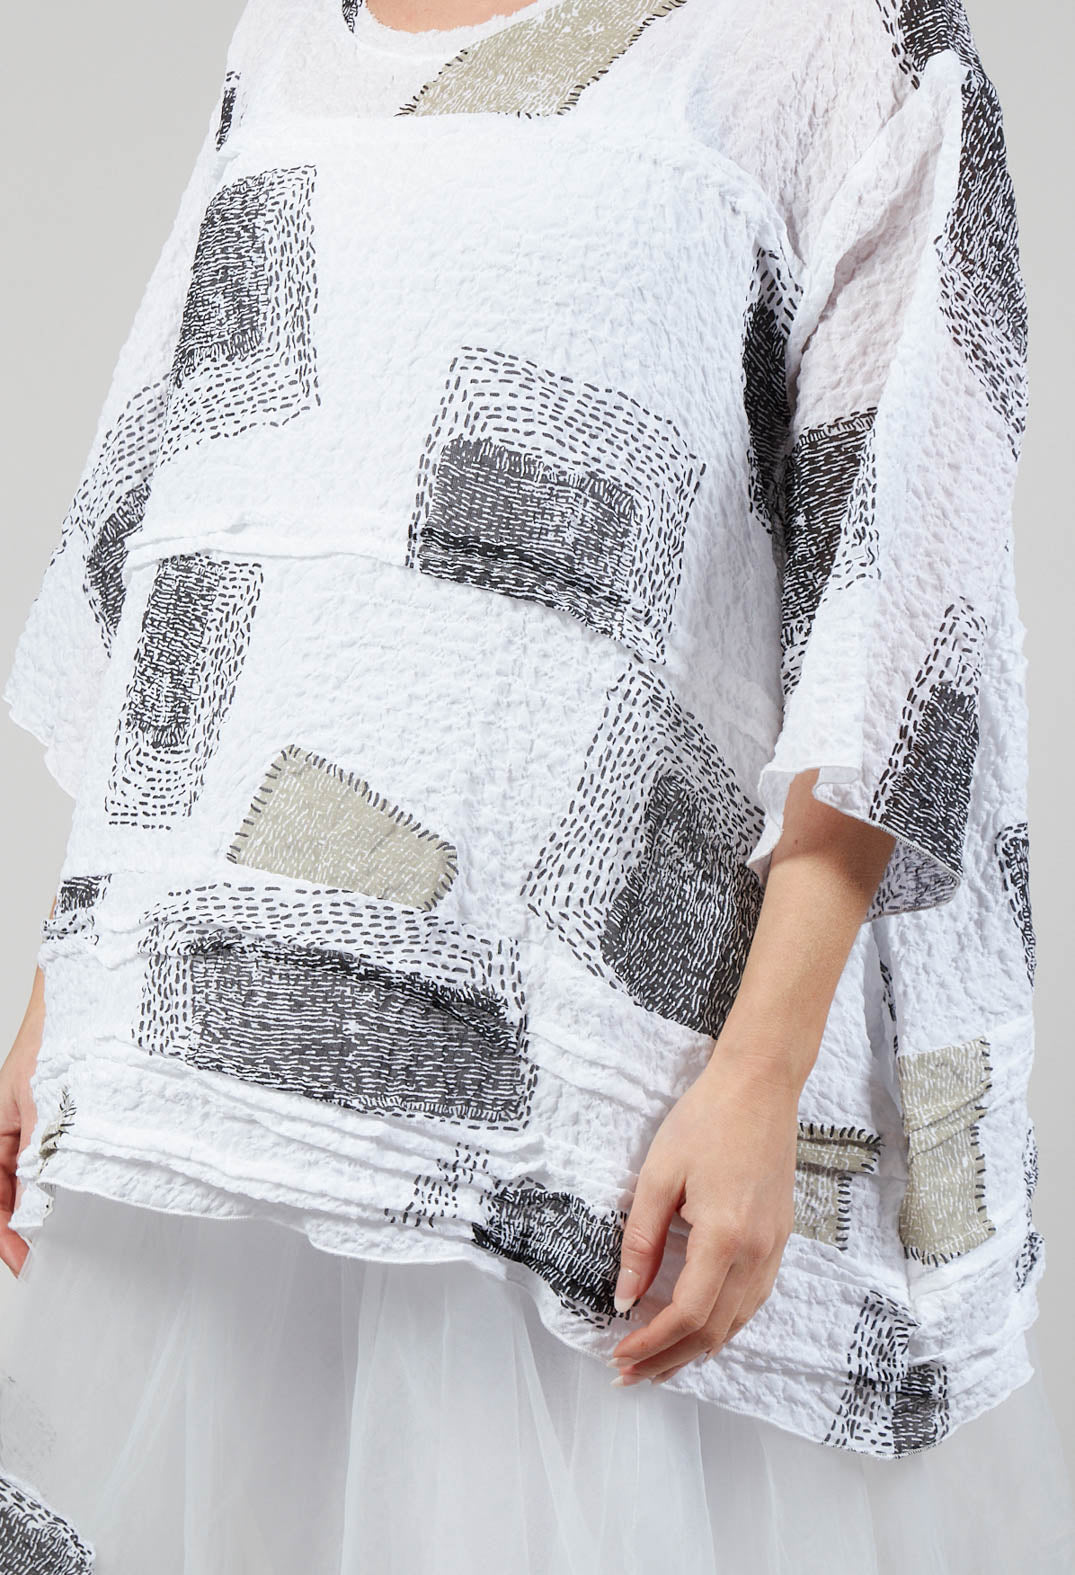 Patch Print Boxy Top in White and Black